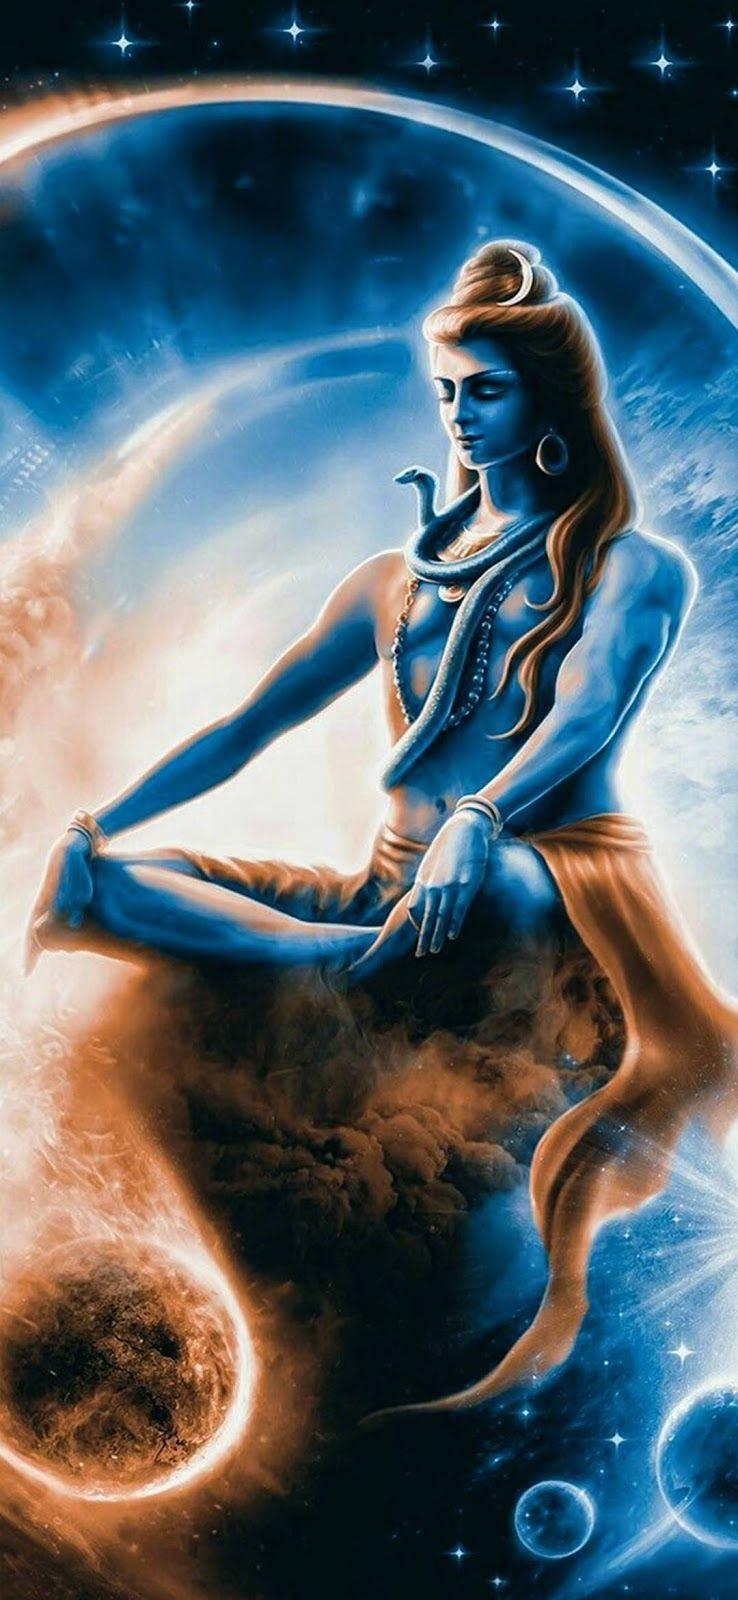 Lord Shiva Art Wallpapers - Top Free Lord Shiva Art Backgrounds ...